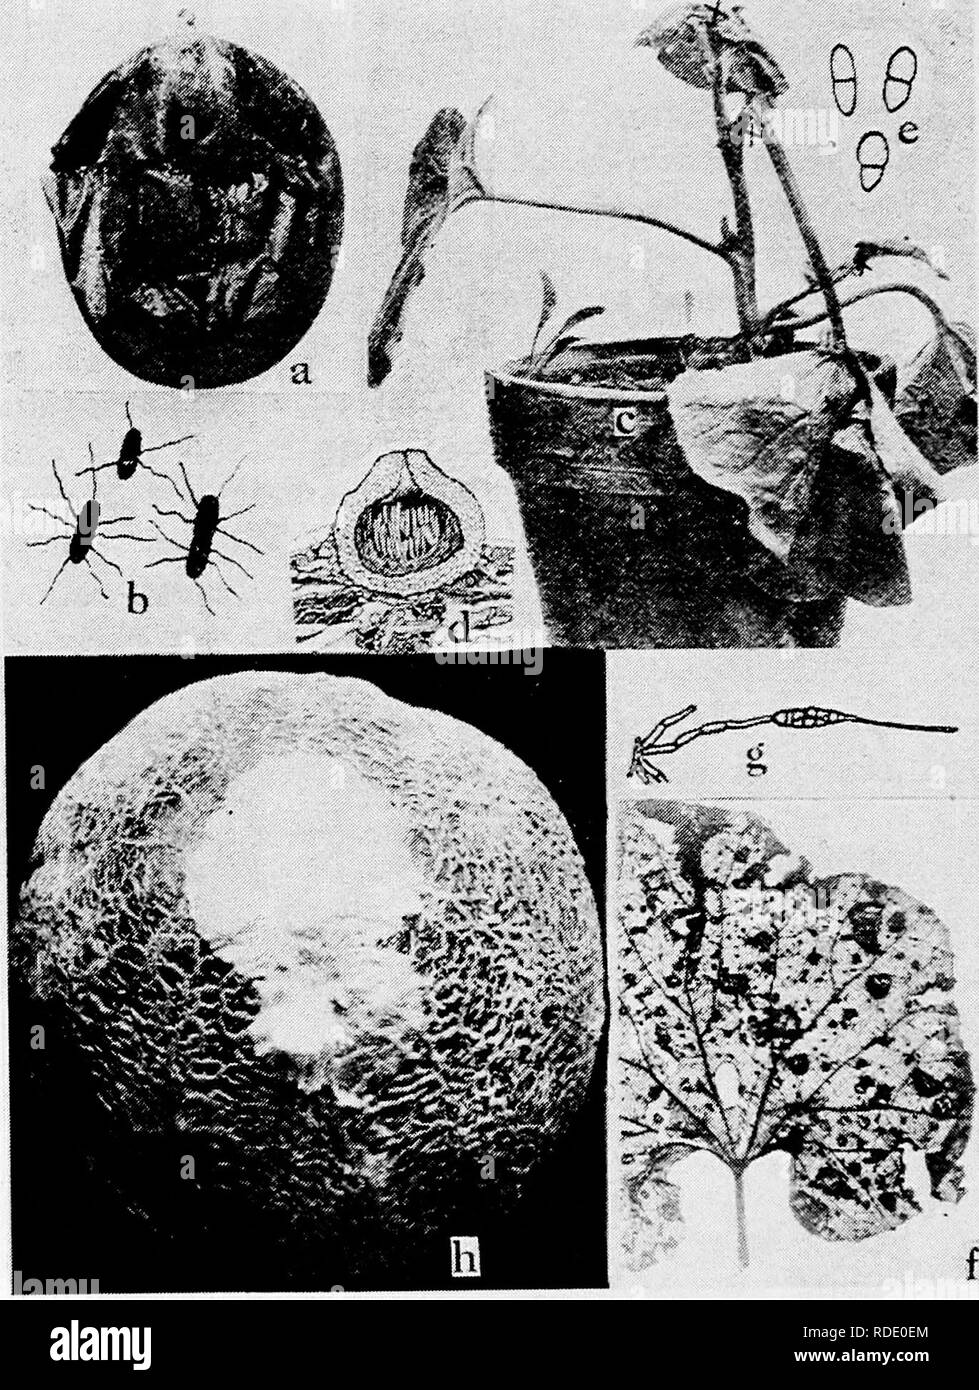 . Diseases of truck crops and their control . Vegetables. Fig. 38. Cantaloup Diseases. a. Soft rot, b. individual germs of soft rot (a. and 6. after Giddings), c. young cantaloup plant artificially inoculated with Mycosphserella wilt, d. section through a perithecium of Mycospheerella citrullina, showing immature asci, e. ascospores of M. citrullina (c. to e. after Grossenbacher),/. Altemaria leaf blieht, g. Conidiophores and spore of Macrosporium cucumerinum (a^âcâ ^Â»iisÂ«.yj--= .Â»= .v. - .;â -i^i;â.. Please note that these images are extracted from scanned page images that may have been di Stock Photo